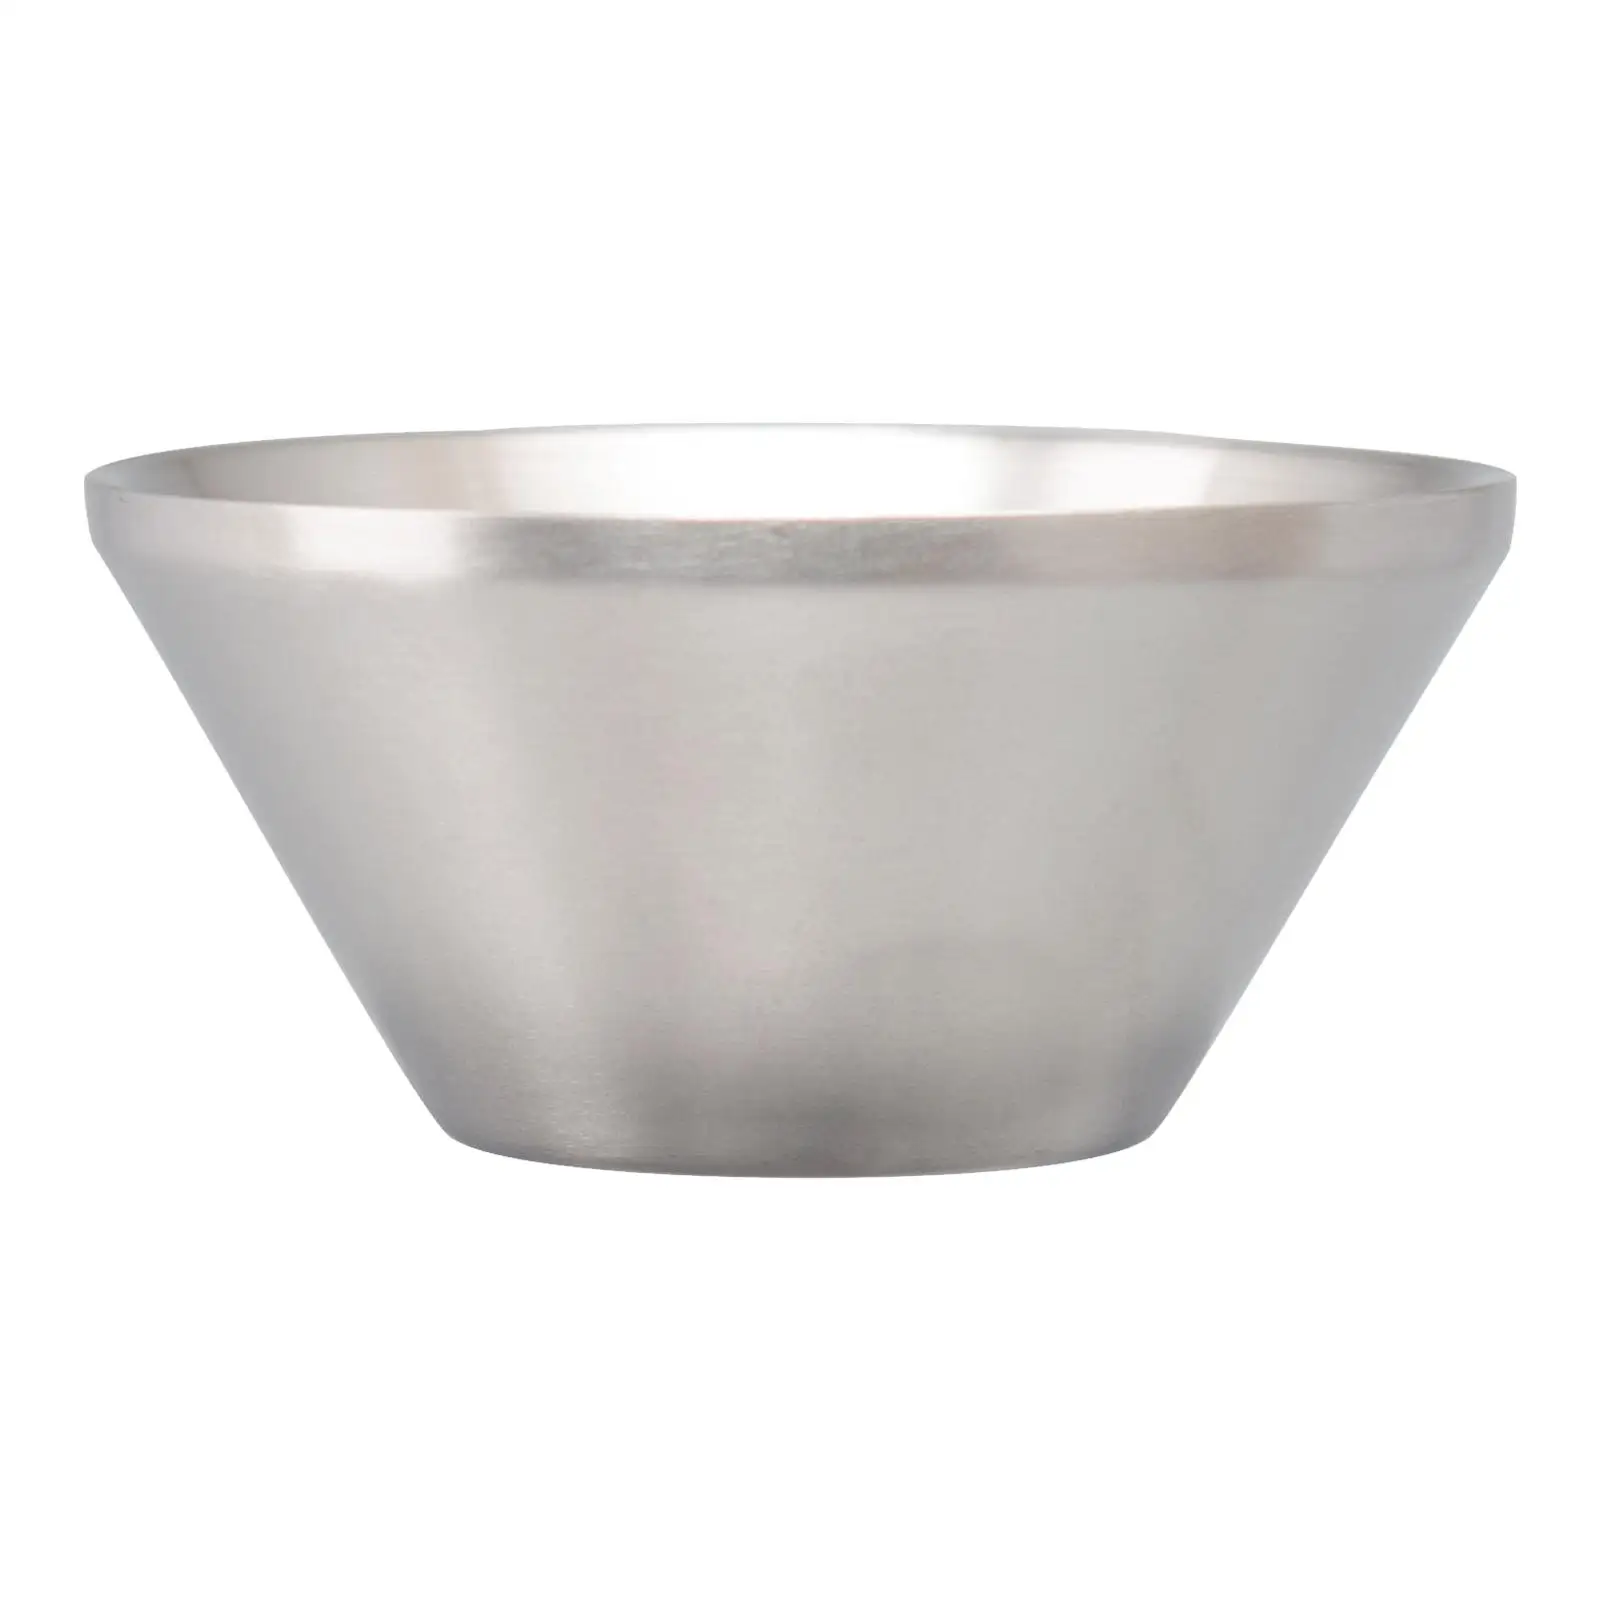 Stainless Steel Shaving Bowl Durable Shave Soap Cup for Maximum Lather